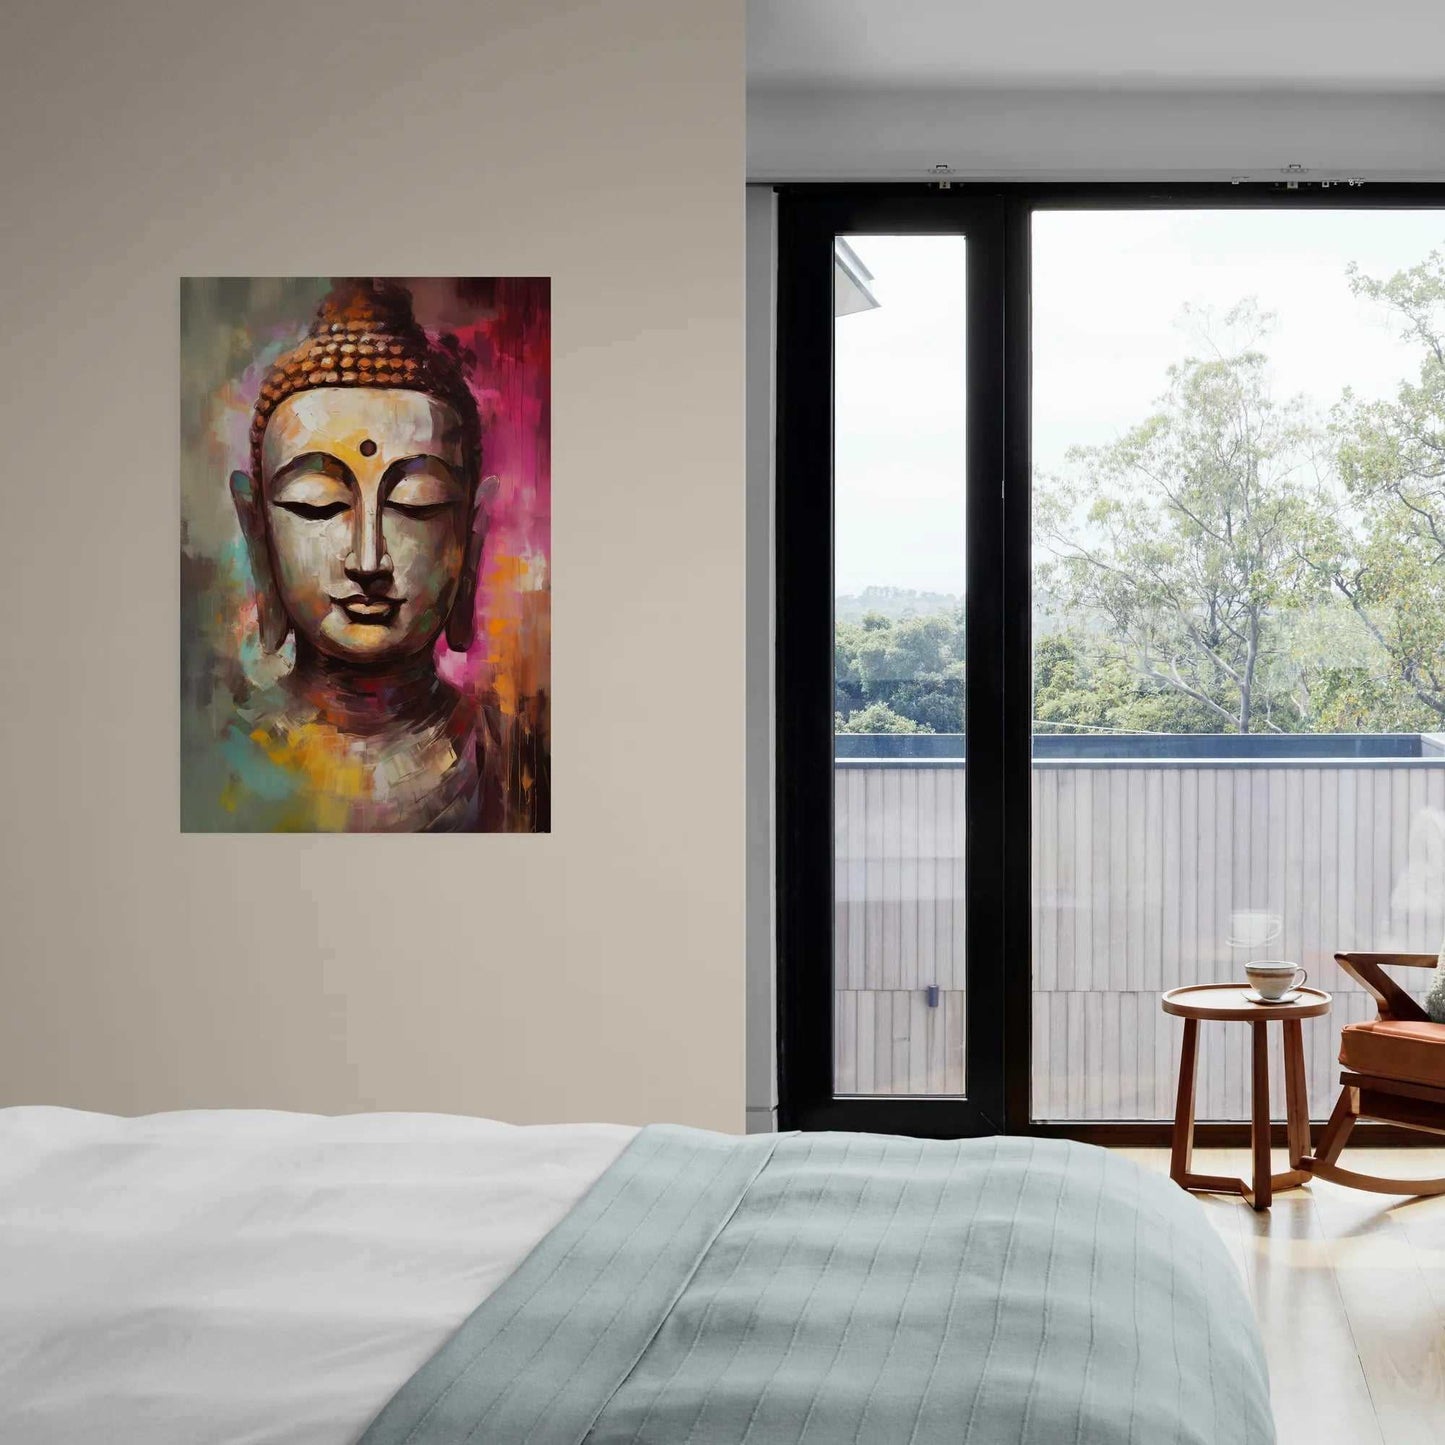 Bedroom with a view of the outdoors, featuring an abstract Buddha artwork above the bed with a muted blue comforter.